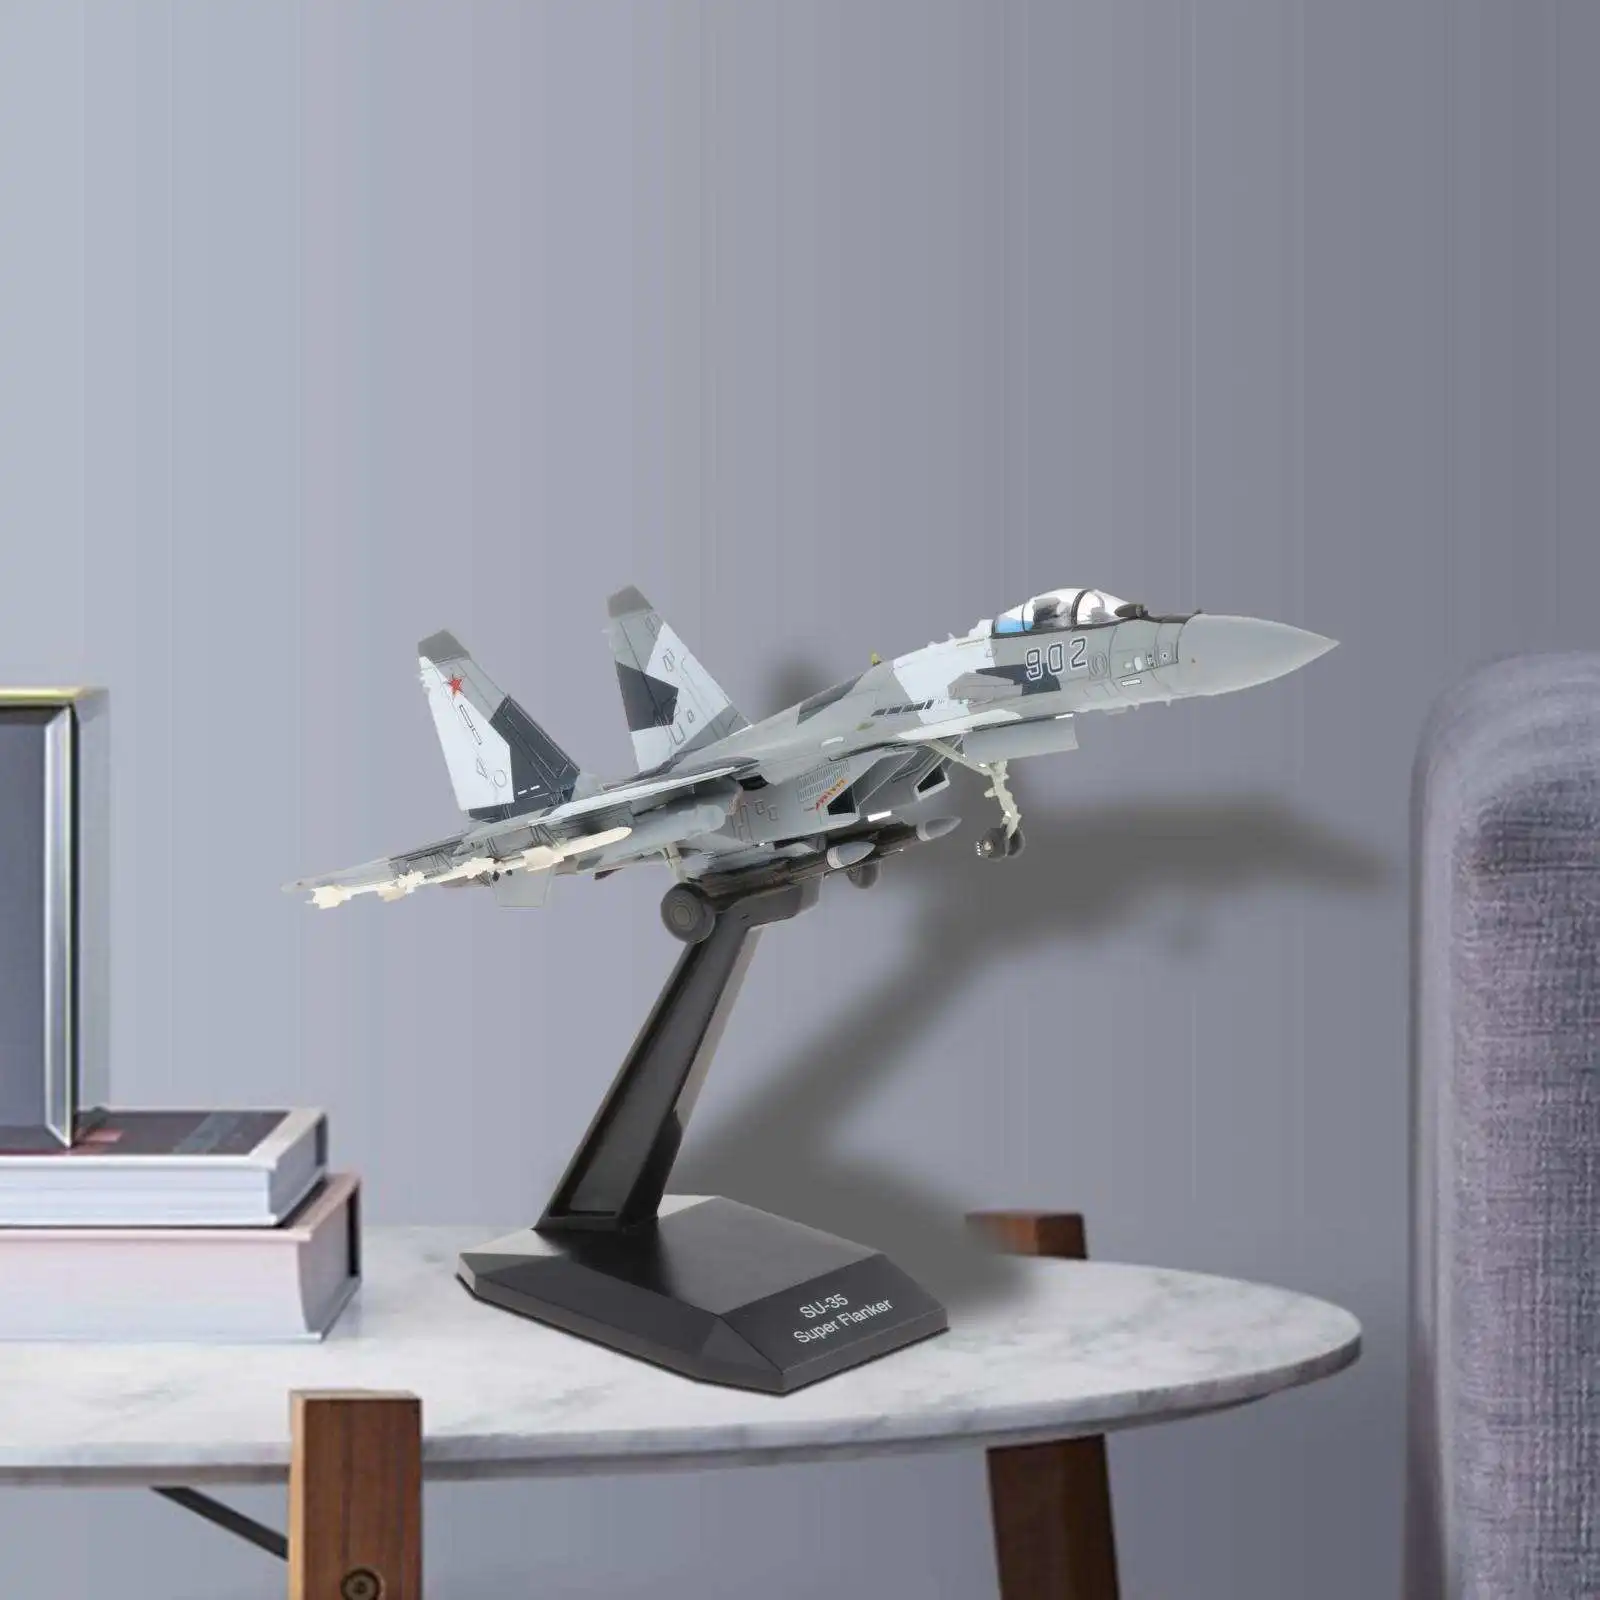 1:100 Sukhoi Su-35 Alloy Model Aircraft with Display Stand Home Ornaments